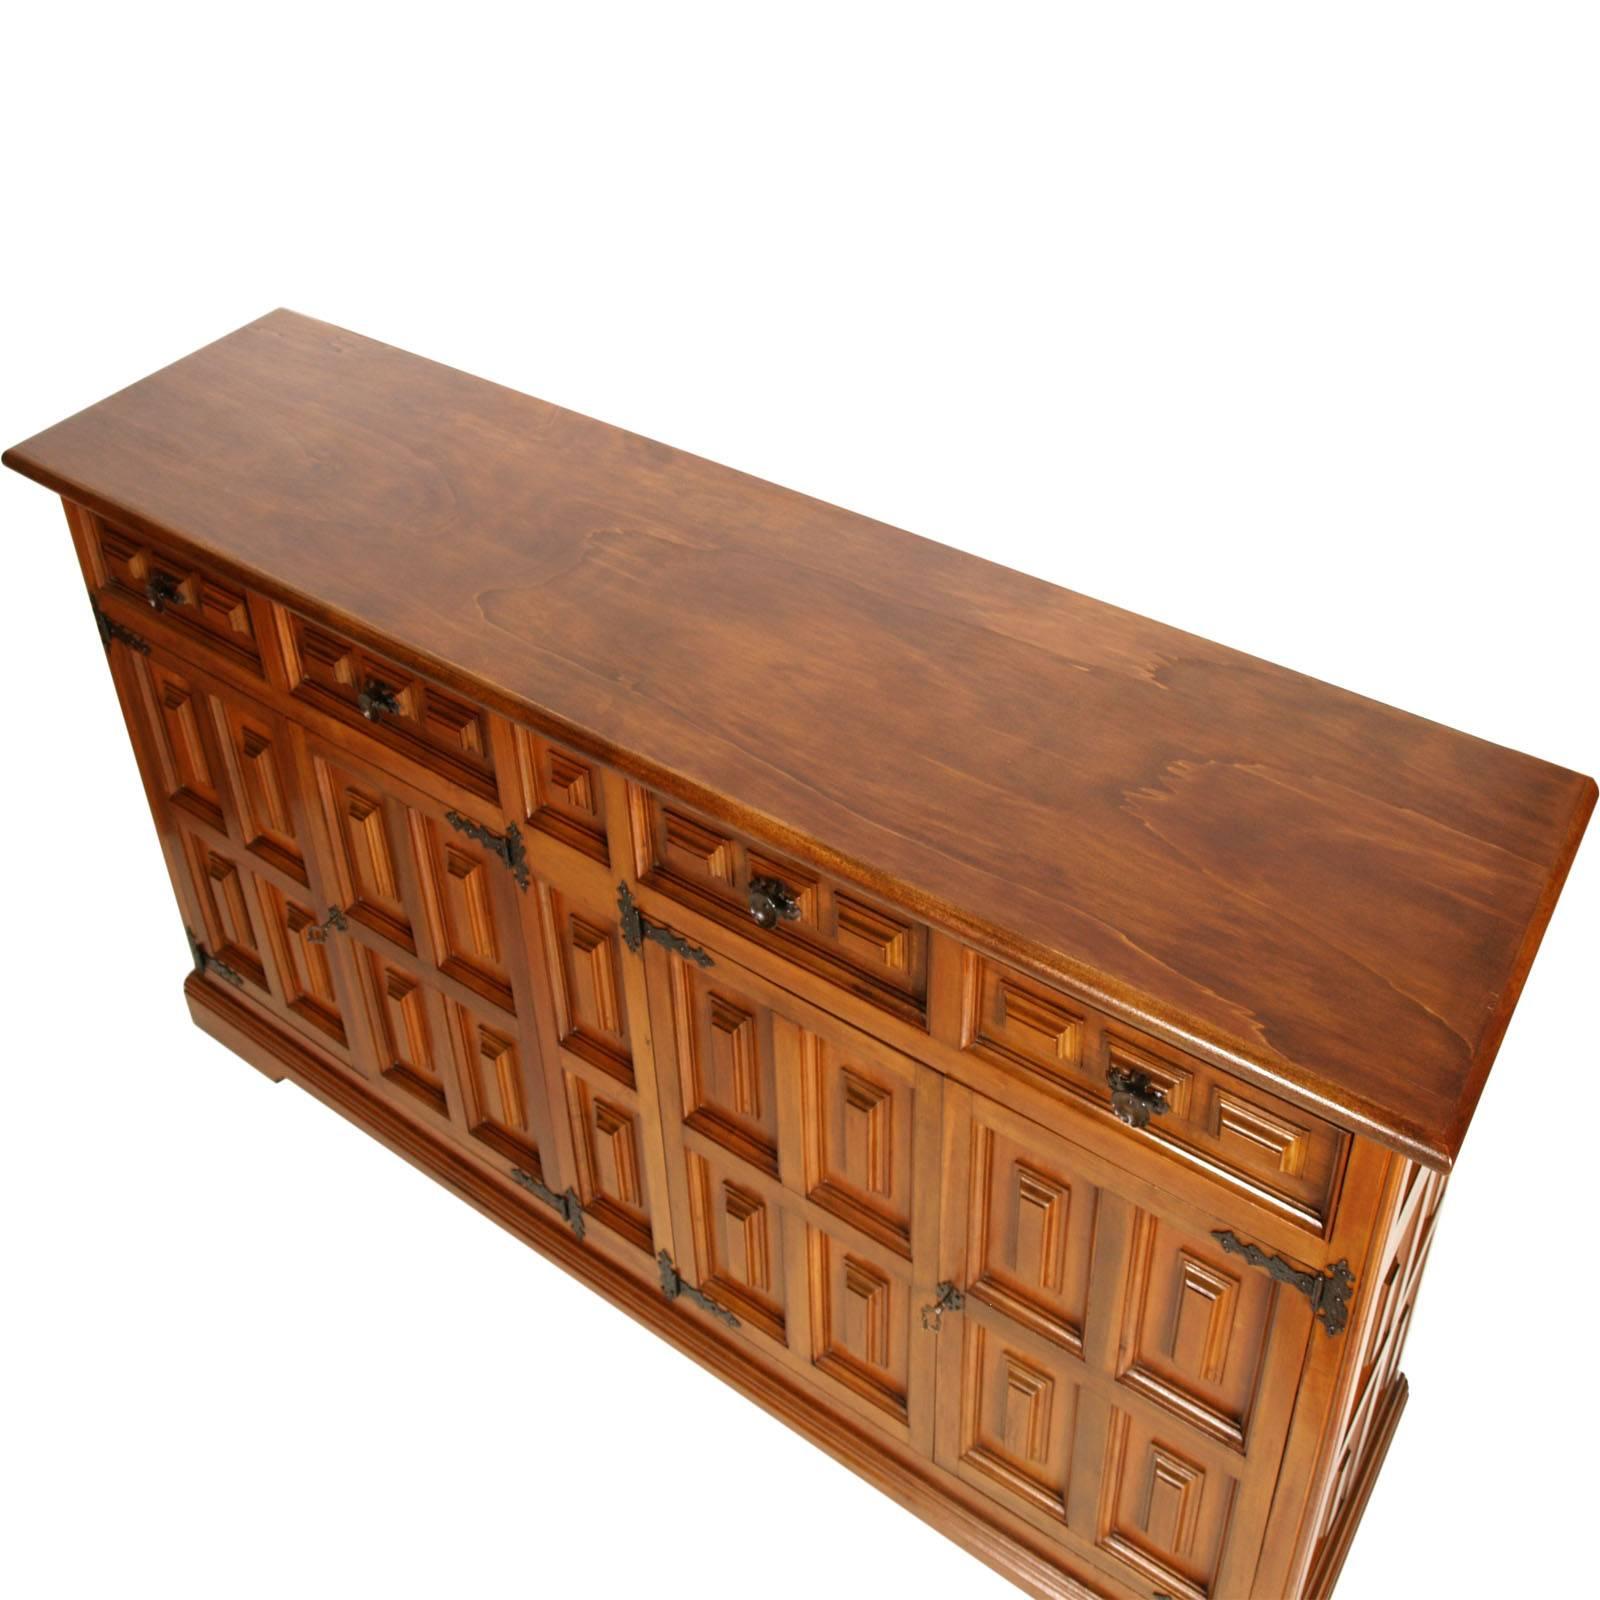 Midcentury Italian Renaissance credenza cupboard from Bassano  in solid walnut polished to wax.

This style of furniture has been widely used in Italy in the the country houses, from the 1930s to the 1970s, with the name of 